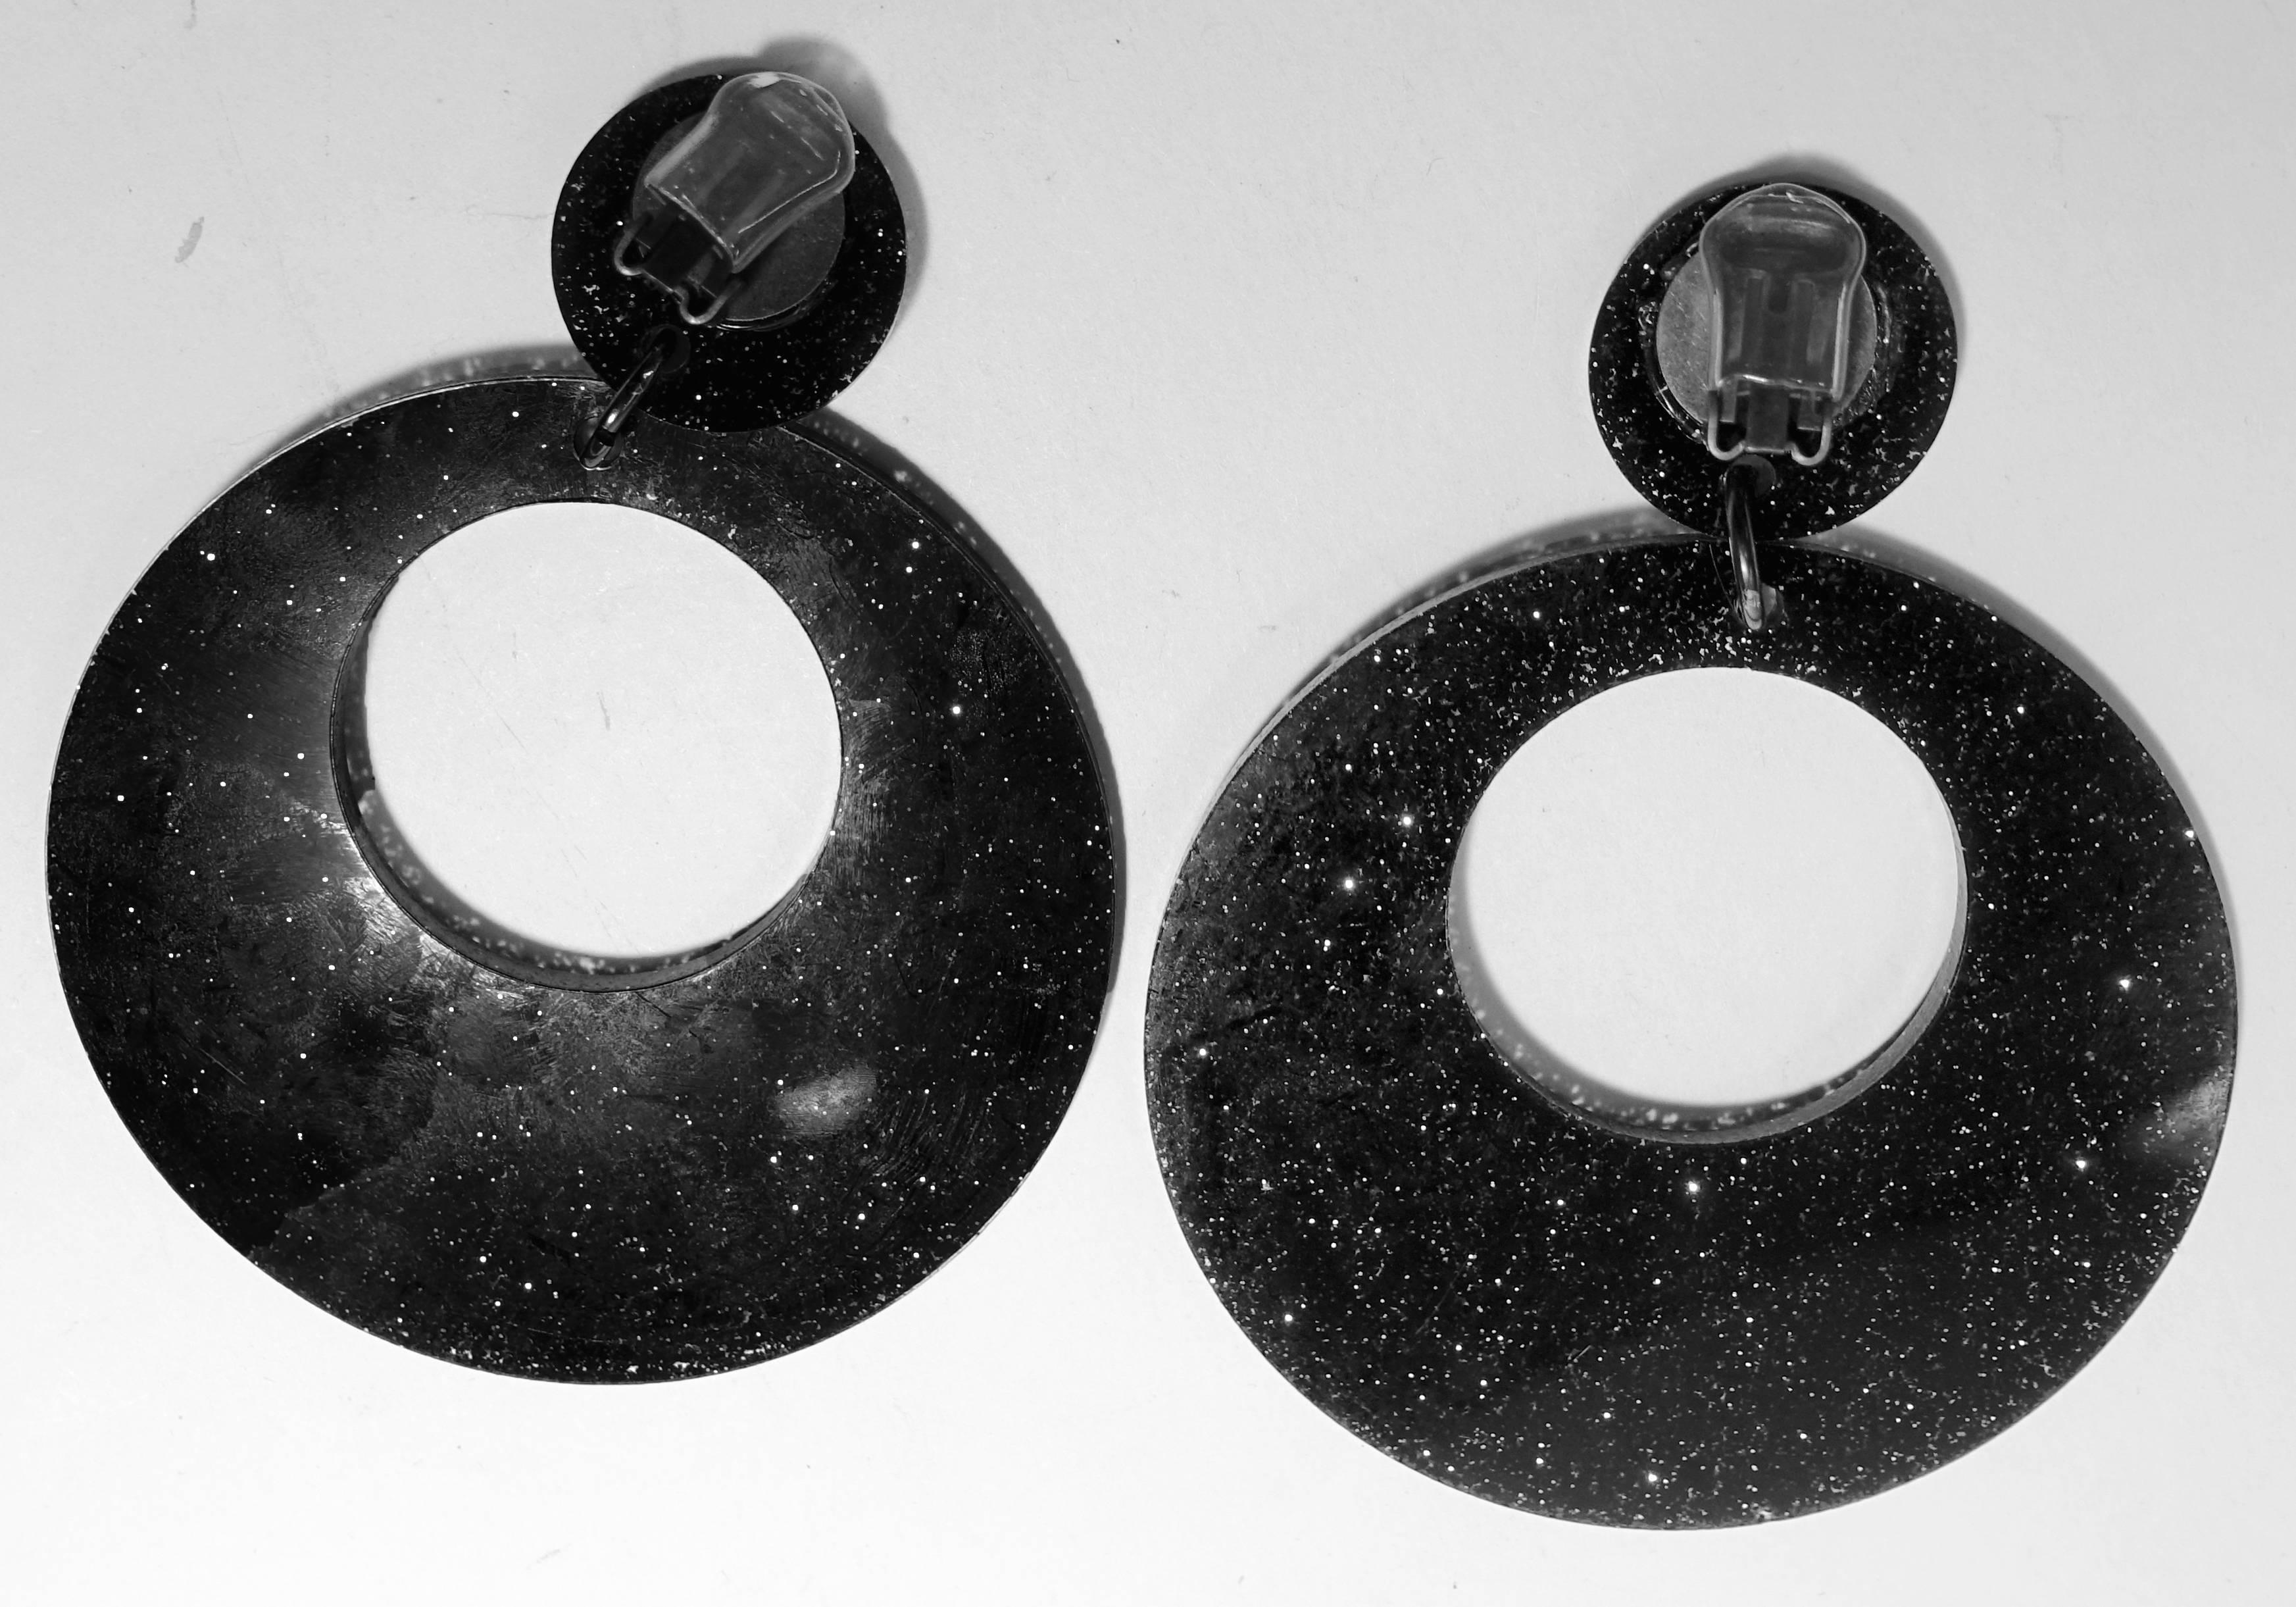 These clip earrings are so campy, I had to buy them in black also.  They each have a black plastic iridescent round disk at the top that connects to a huge dangling black hoop at the bottom. They measure 4-1/8” long and 3-1/4” wide.  You’ll